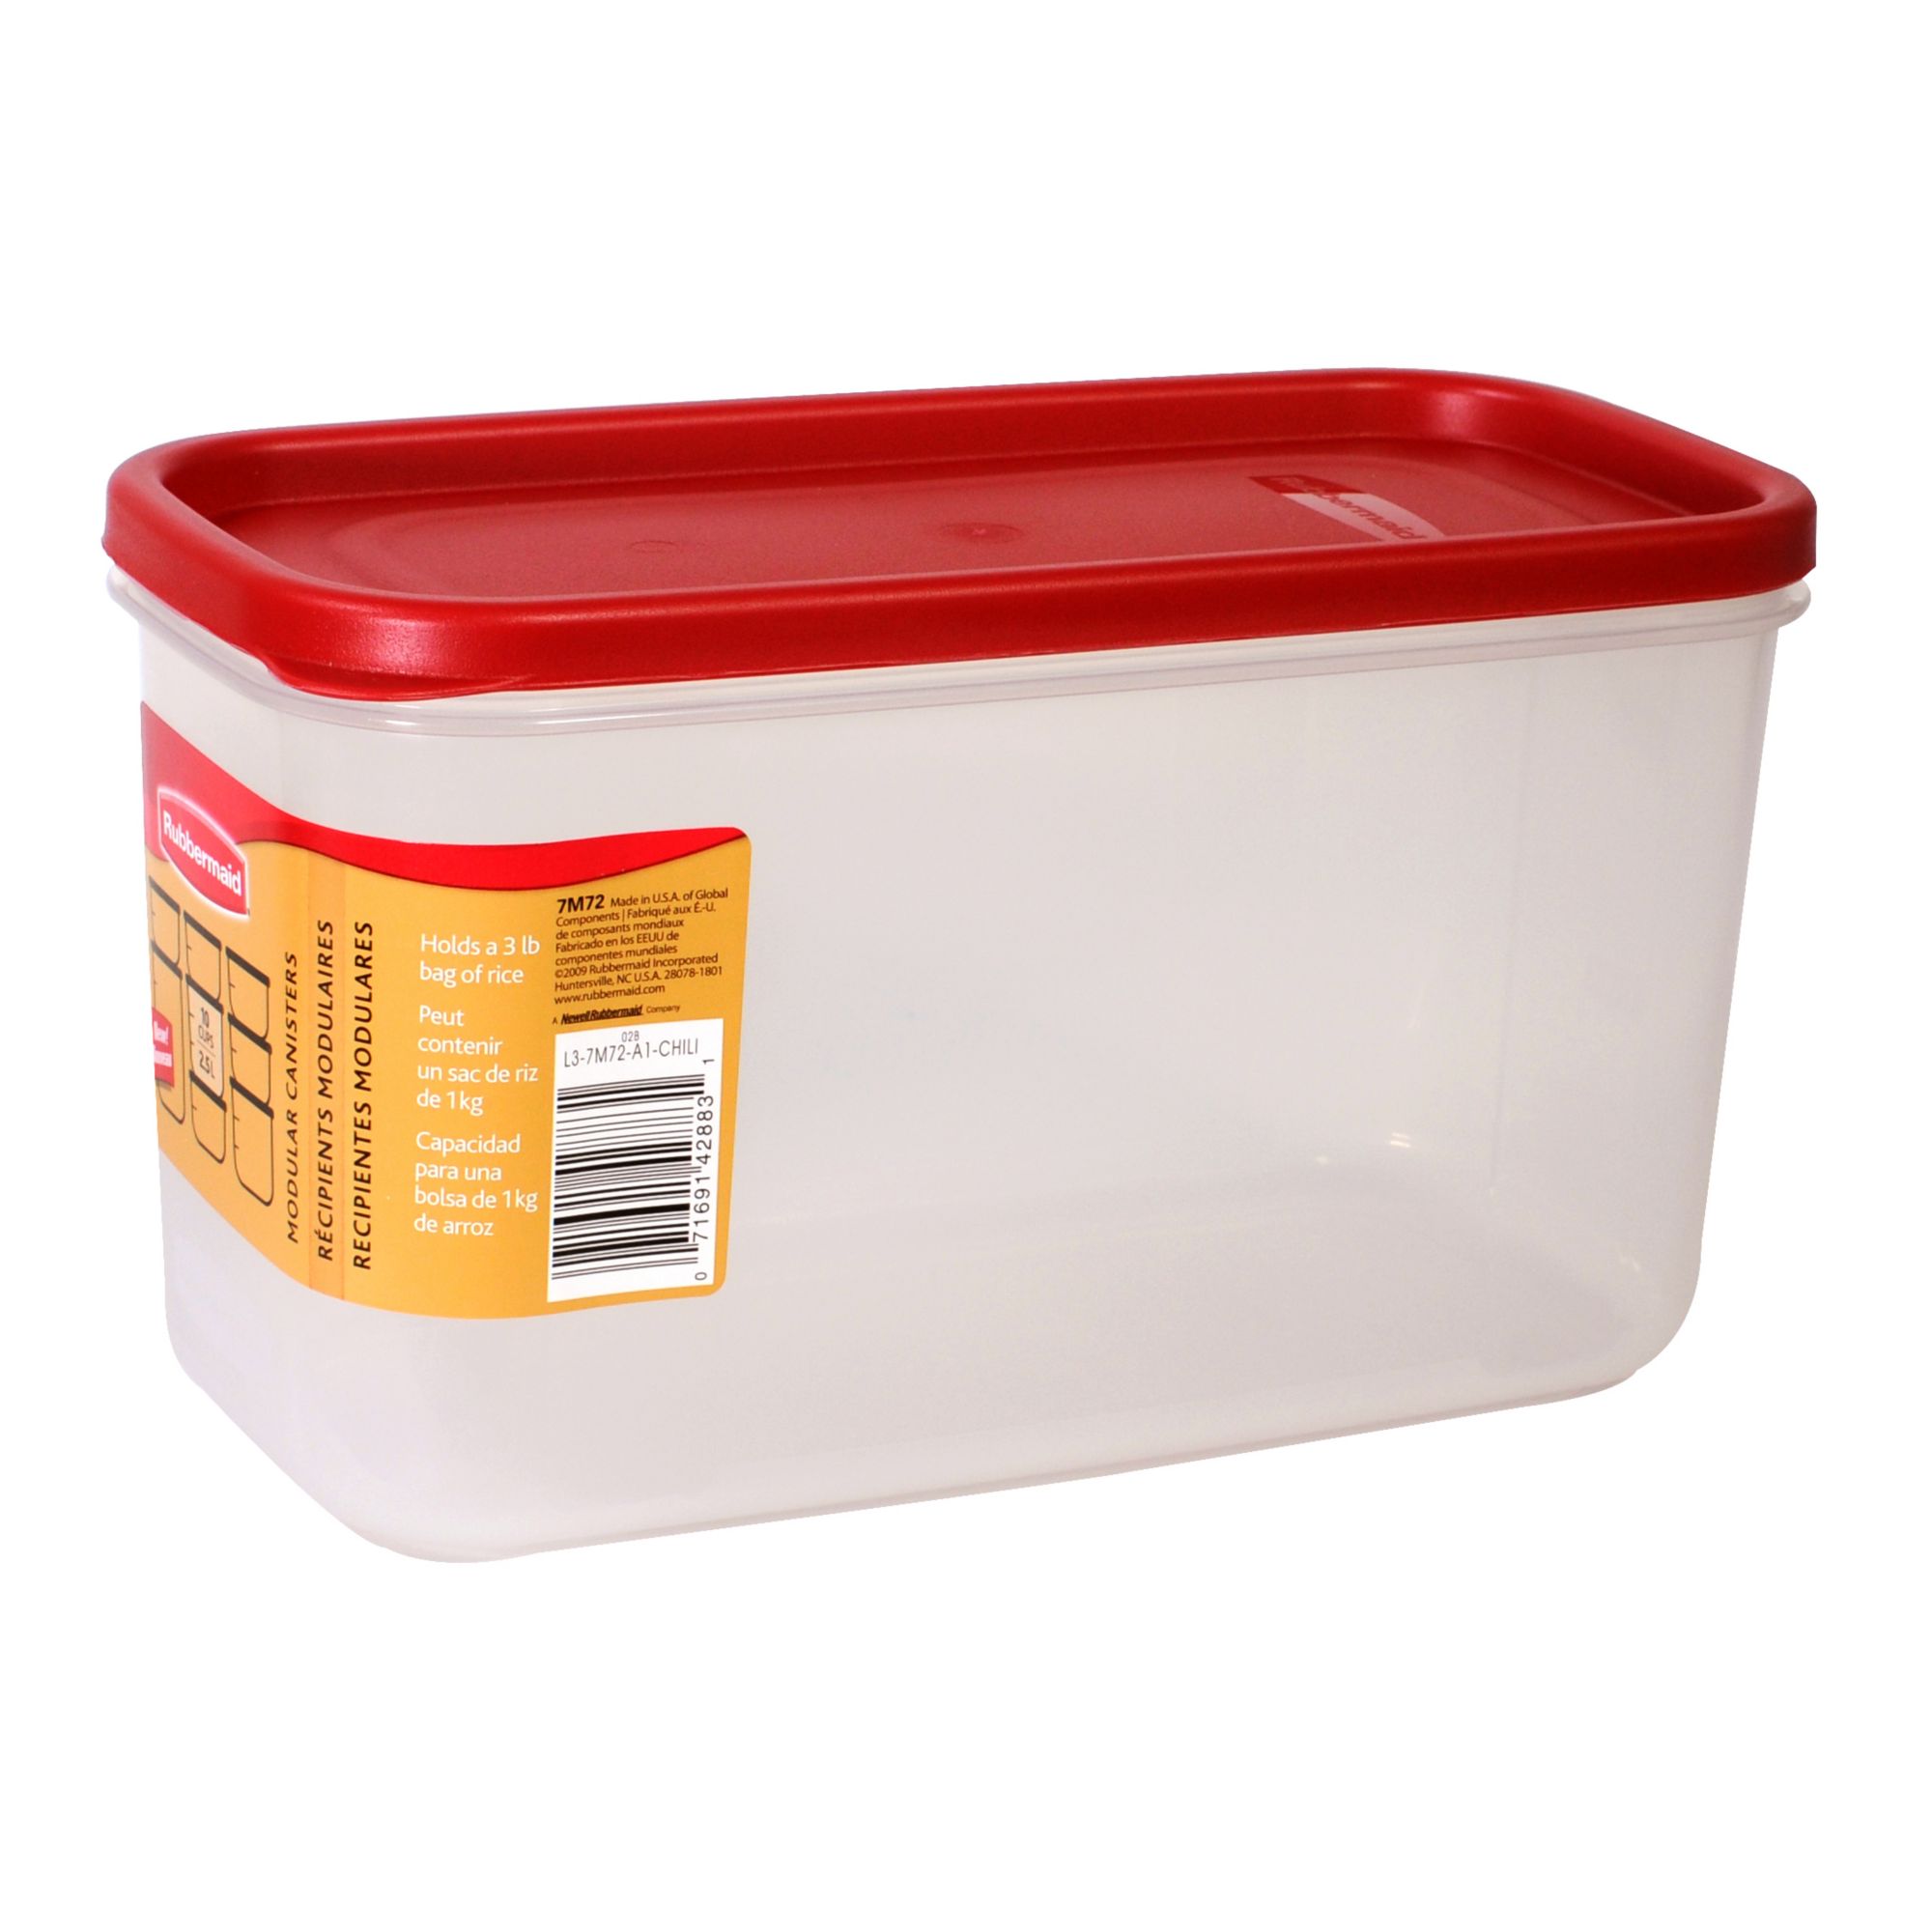 Modular Canisters, Food Storage Container | Rubbermaid